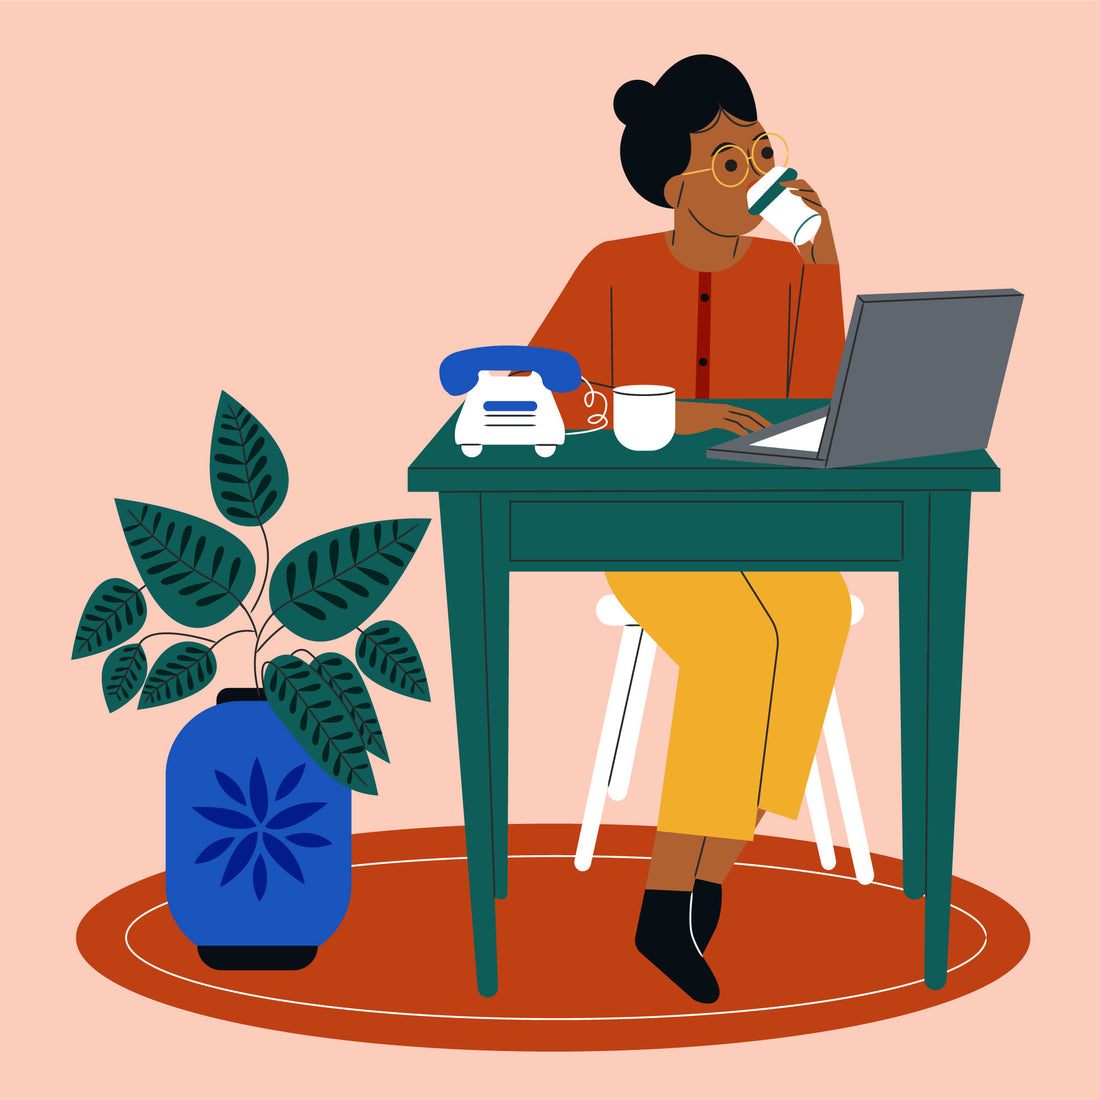 Image by  https://www.freepik.com/free-vector/flat-illustration-secretary-s-day-celebration_38480763.htm#page=2&query=work%20from%20home&position=33&from_view=search&track=ais&uuid=bbab24e7-d2e1-45e0-bab6-f2933f569c50